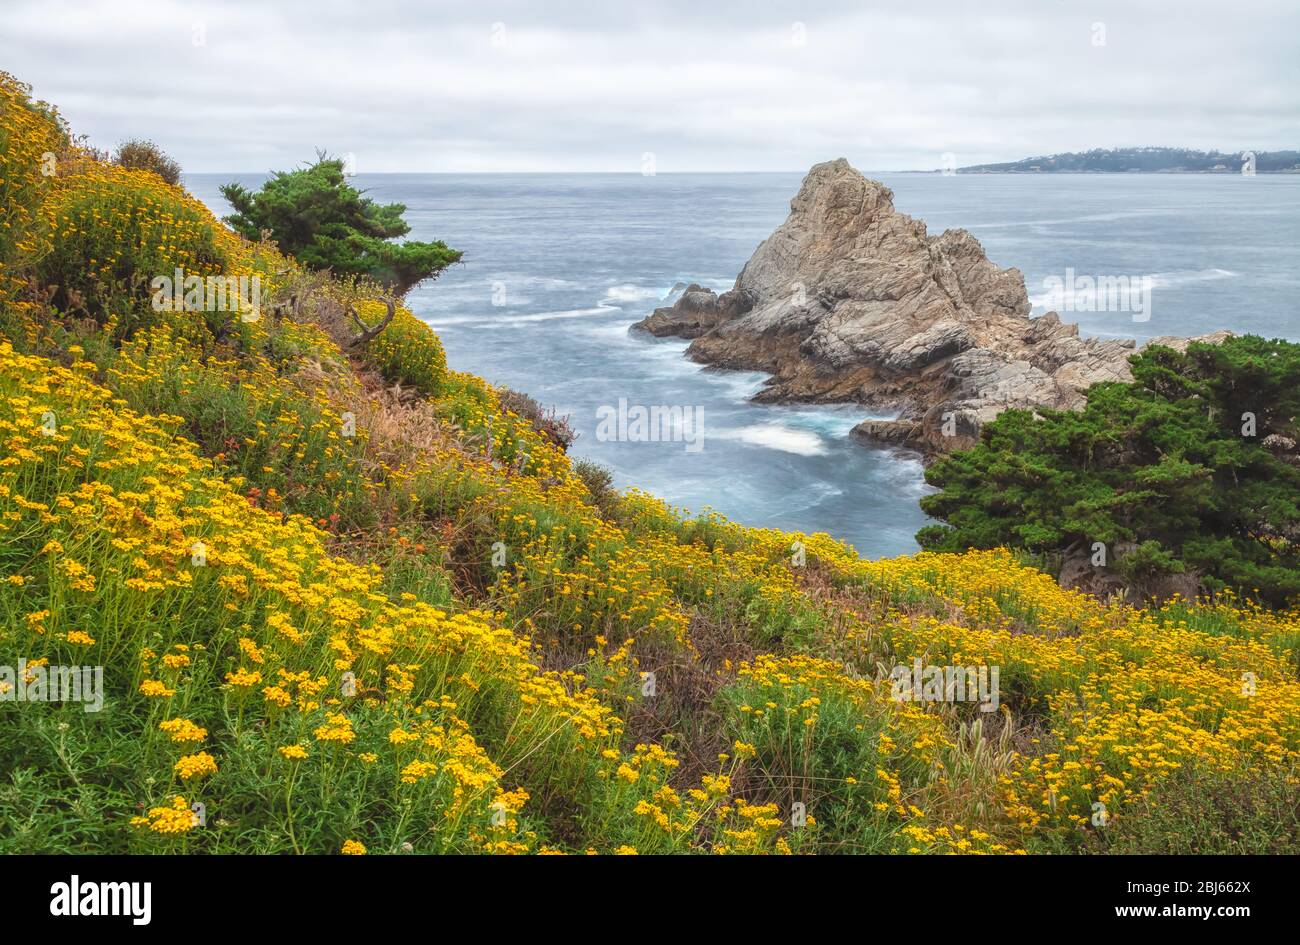 Seaside woolly sunflowers bloom along the shoreline at Point Lobos State Natural Reserve, California, USA, in early summer. Stock Photo